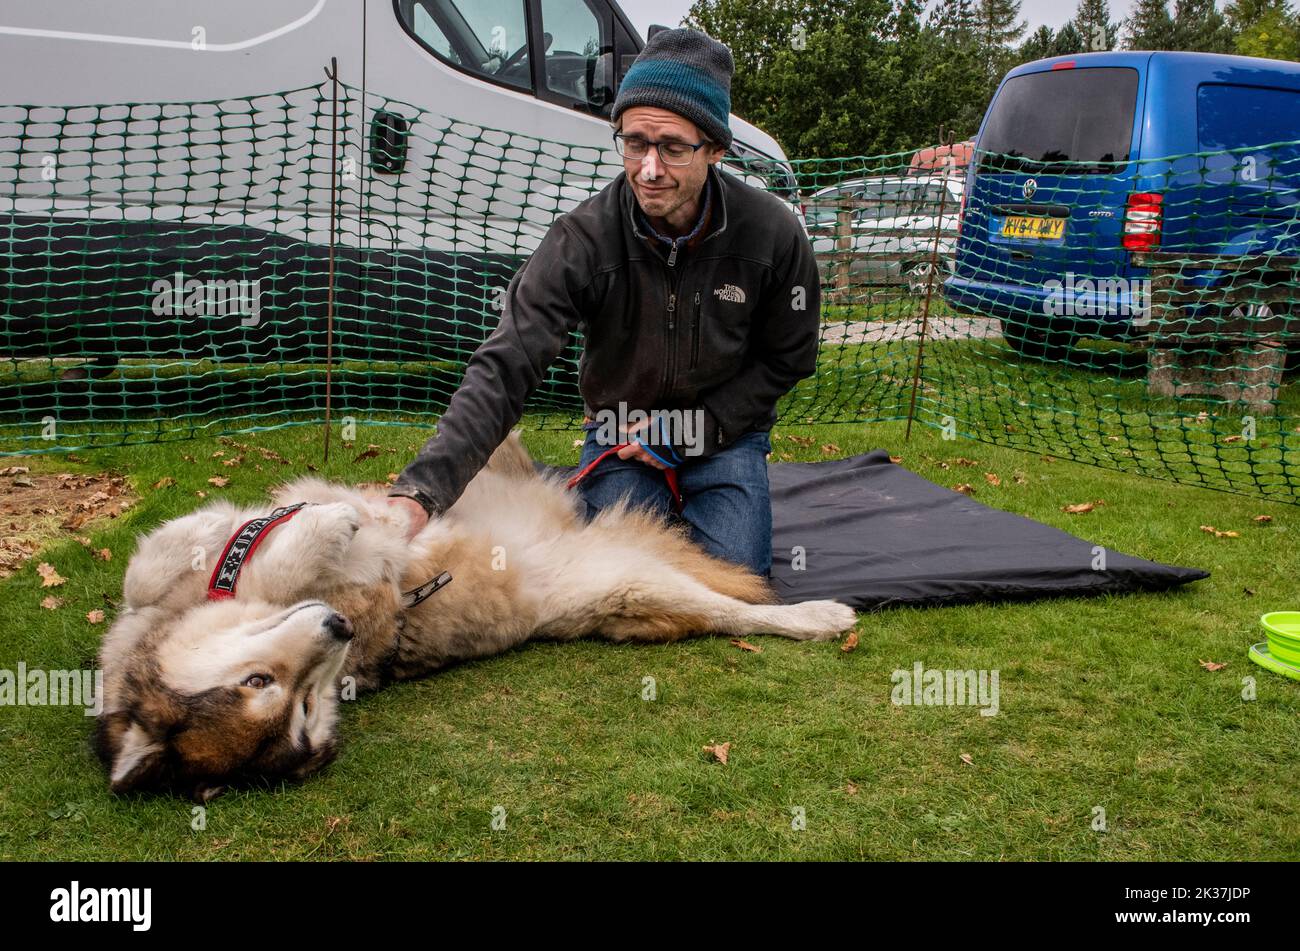 Follifoot, near Harrogate, North Yorkshire, 25th September 2022. The Follifoot Dog Festival where dog lovers were able to show off their beloved pets today. Lulu playing with her owner John. Picture Credit: ernesto rogata/Alamy Live News Stock Photo